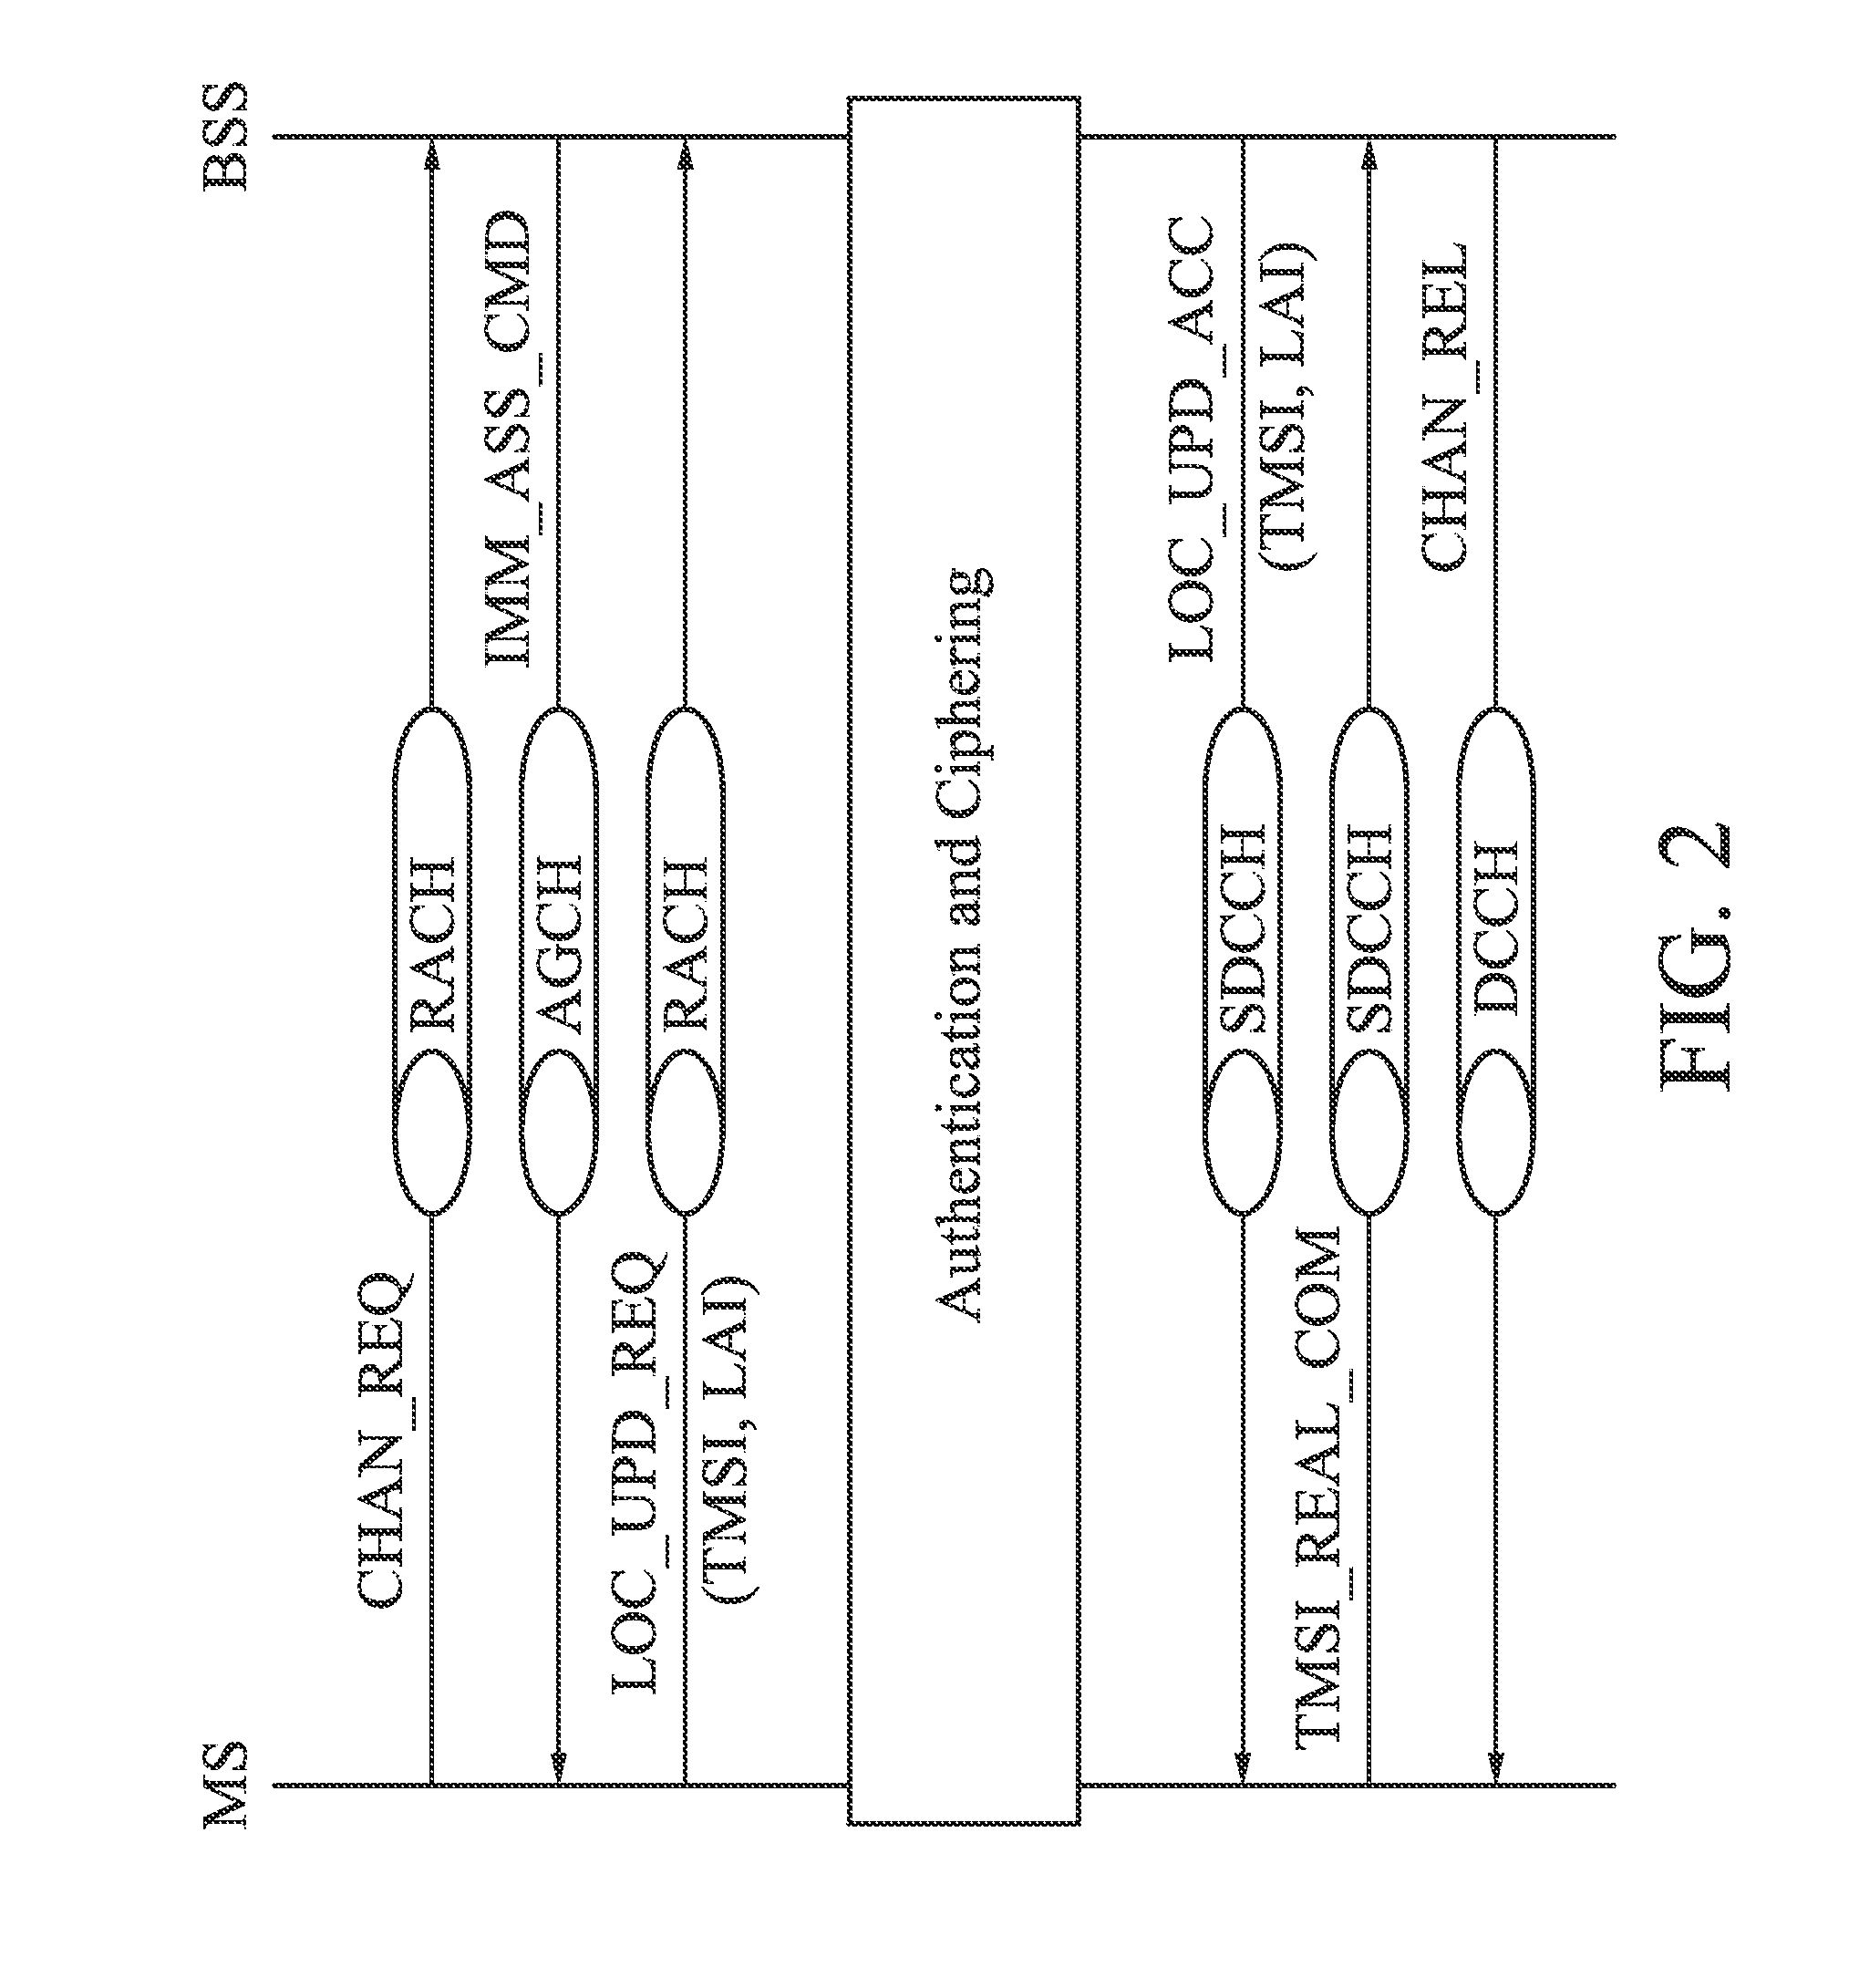 Apparatuses and methods for enhancing data rate for packet-switched (PS) data service